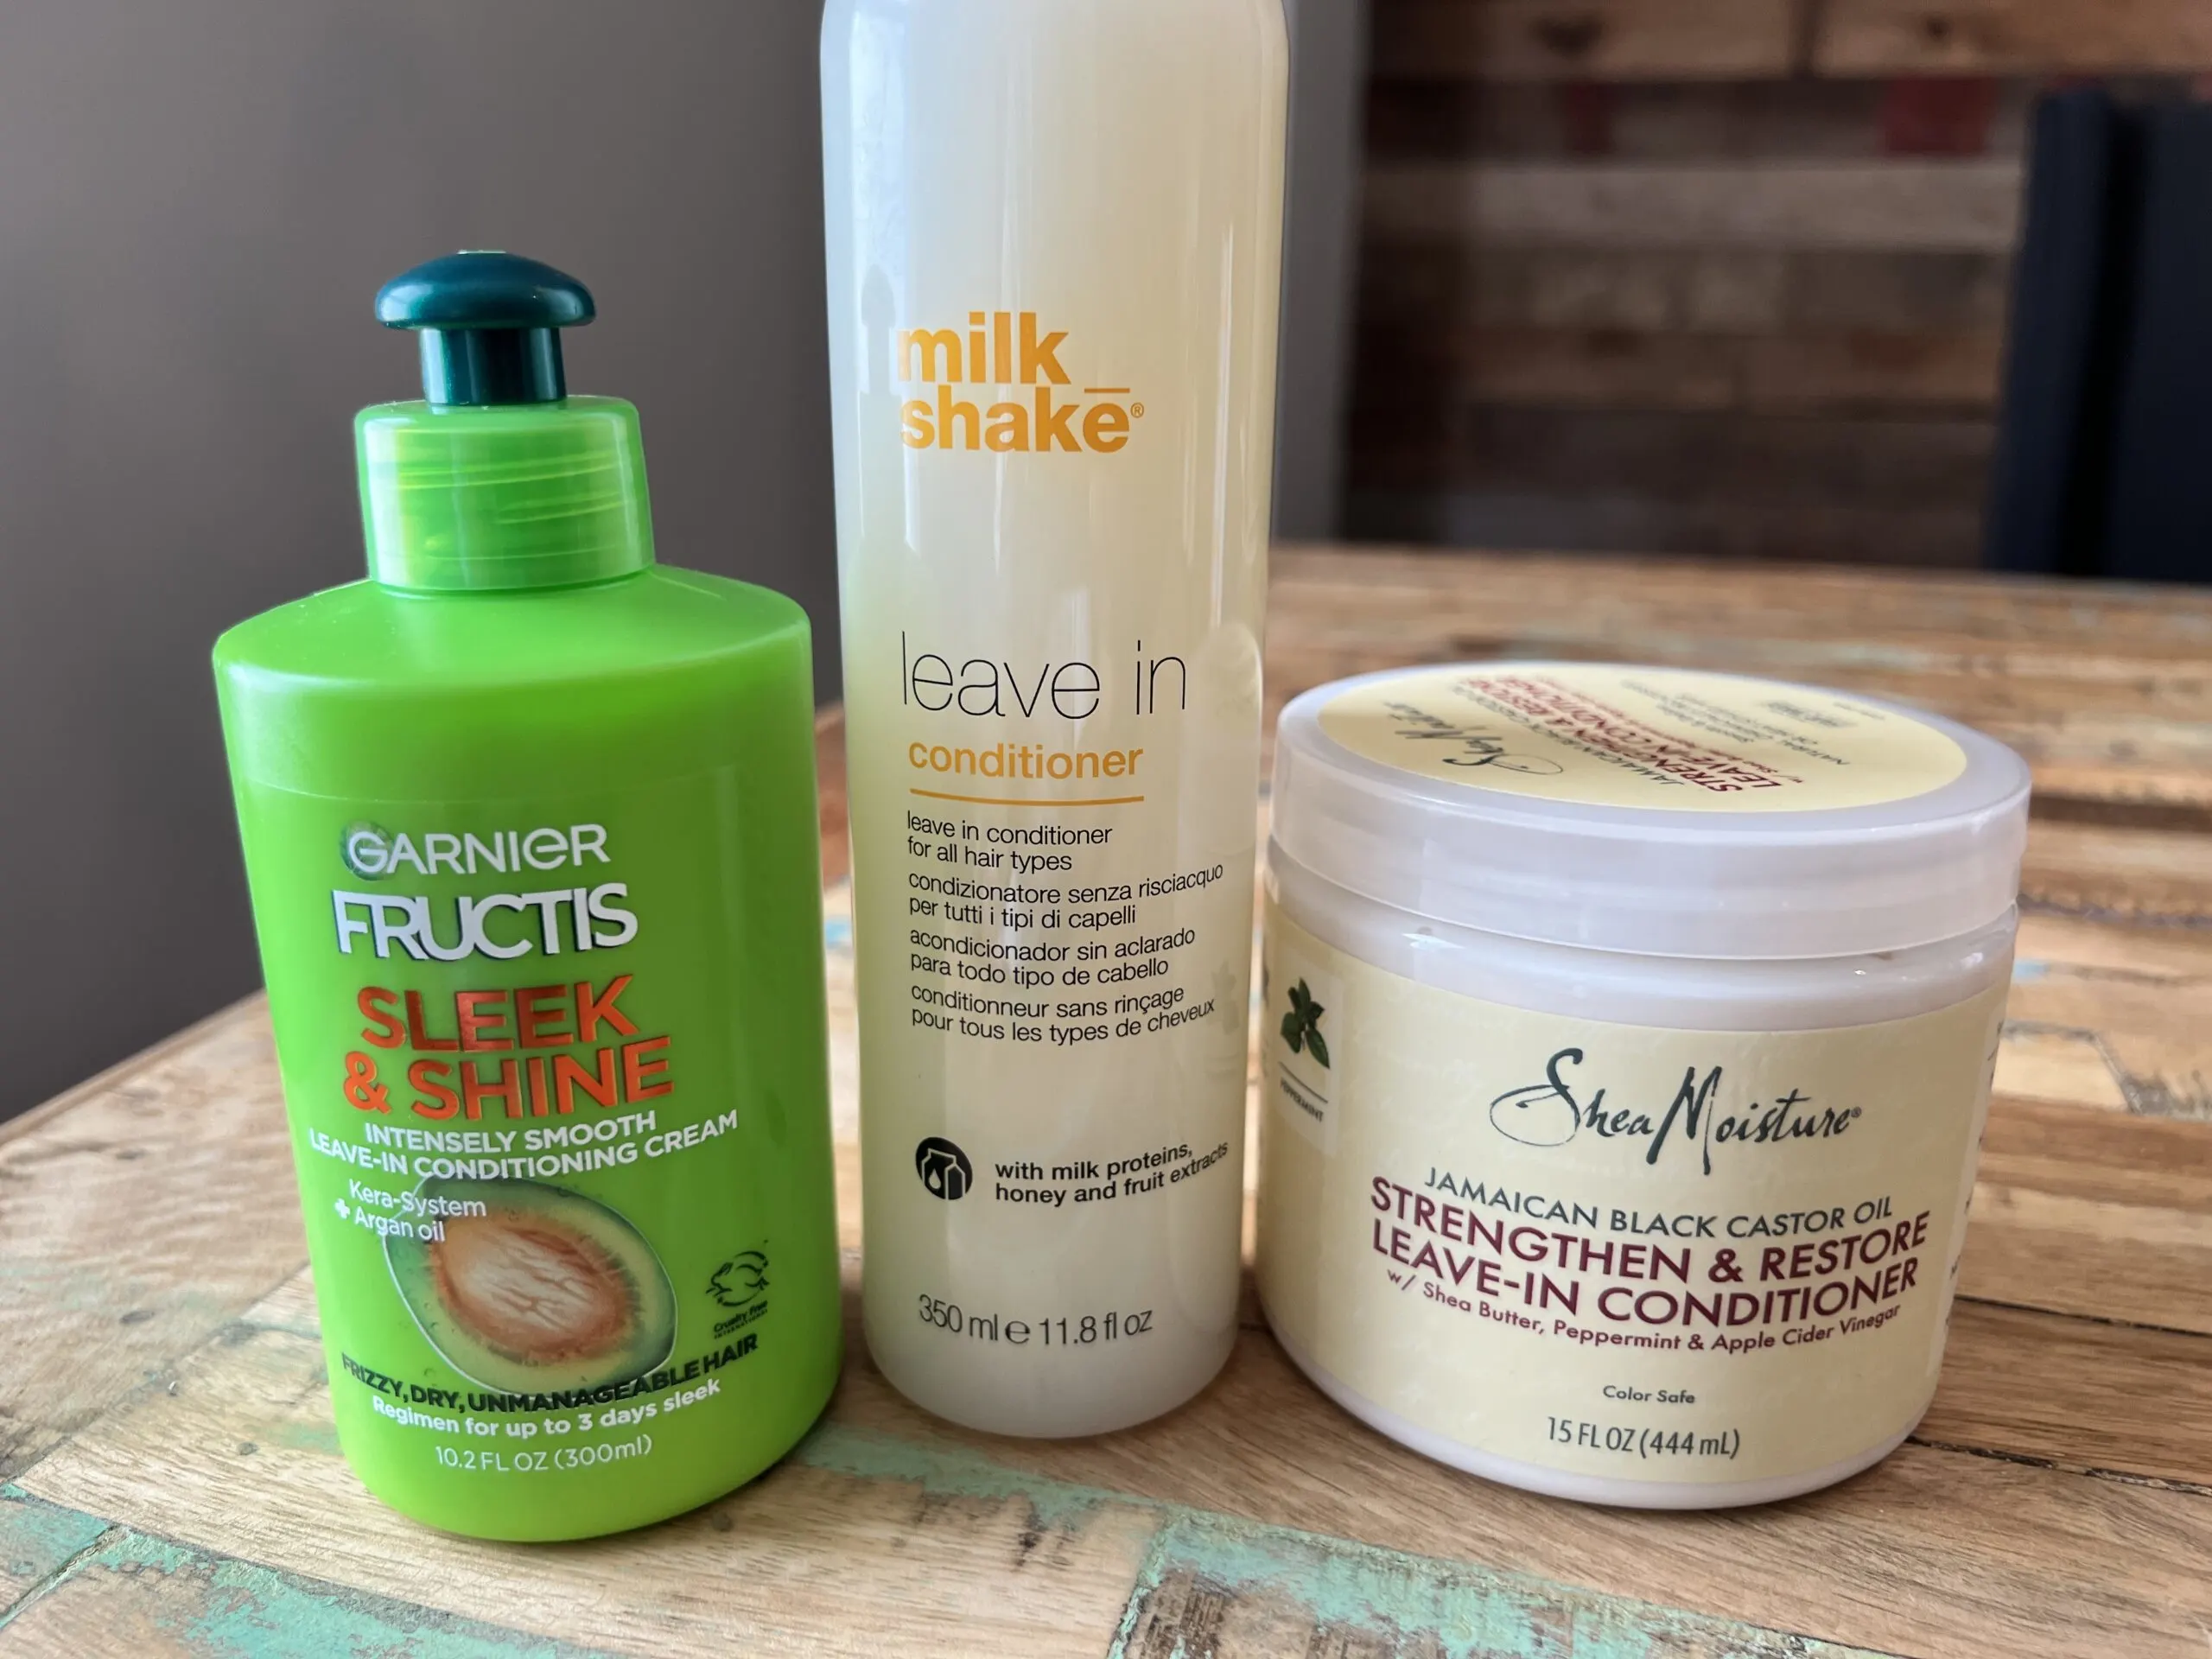 The best leave-in conditioners for curly hair can be used on either wet or dry hair, although damp or wet hair is most common. These products can also be used on straight hair or curly and coily hair strands.